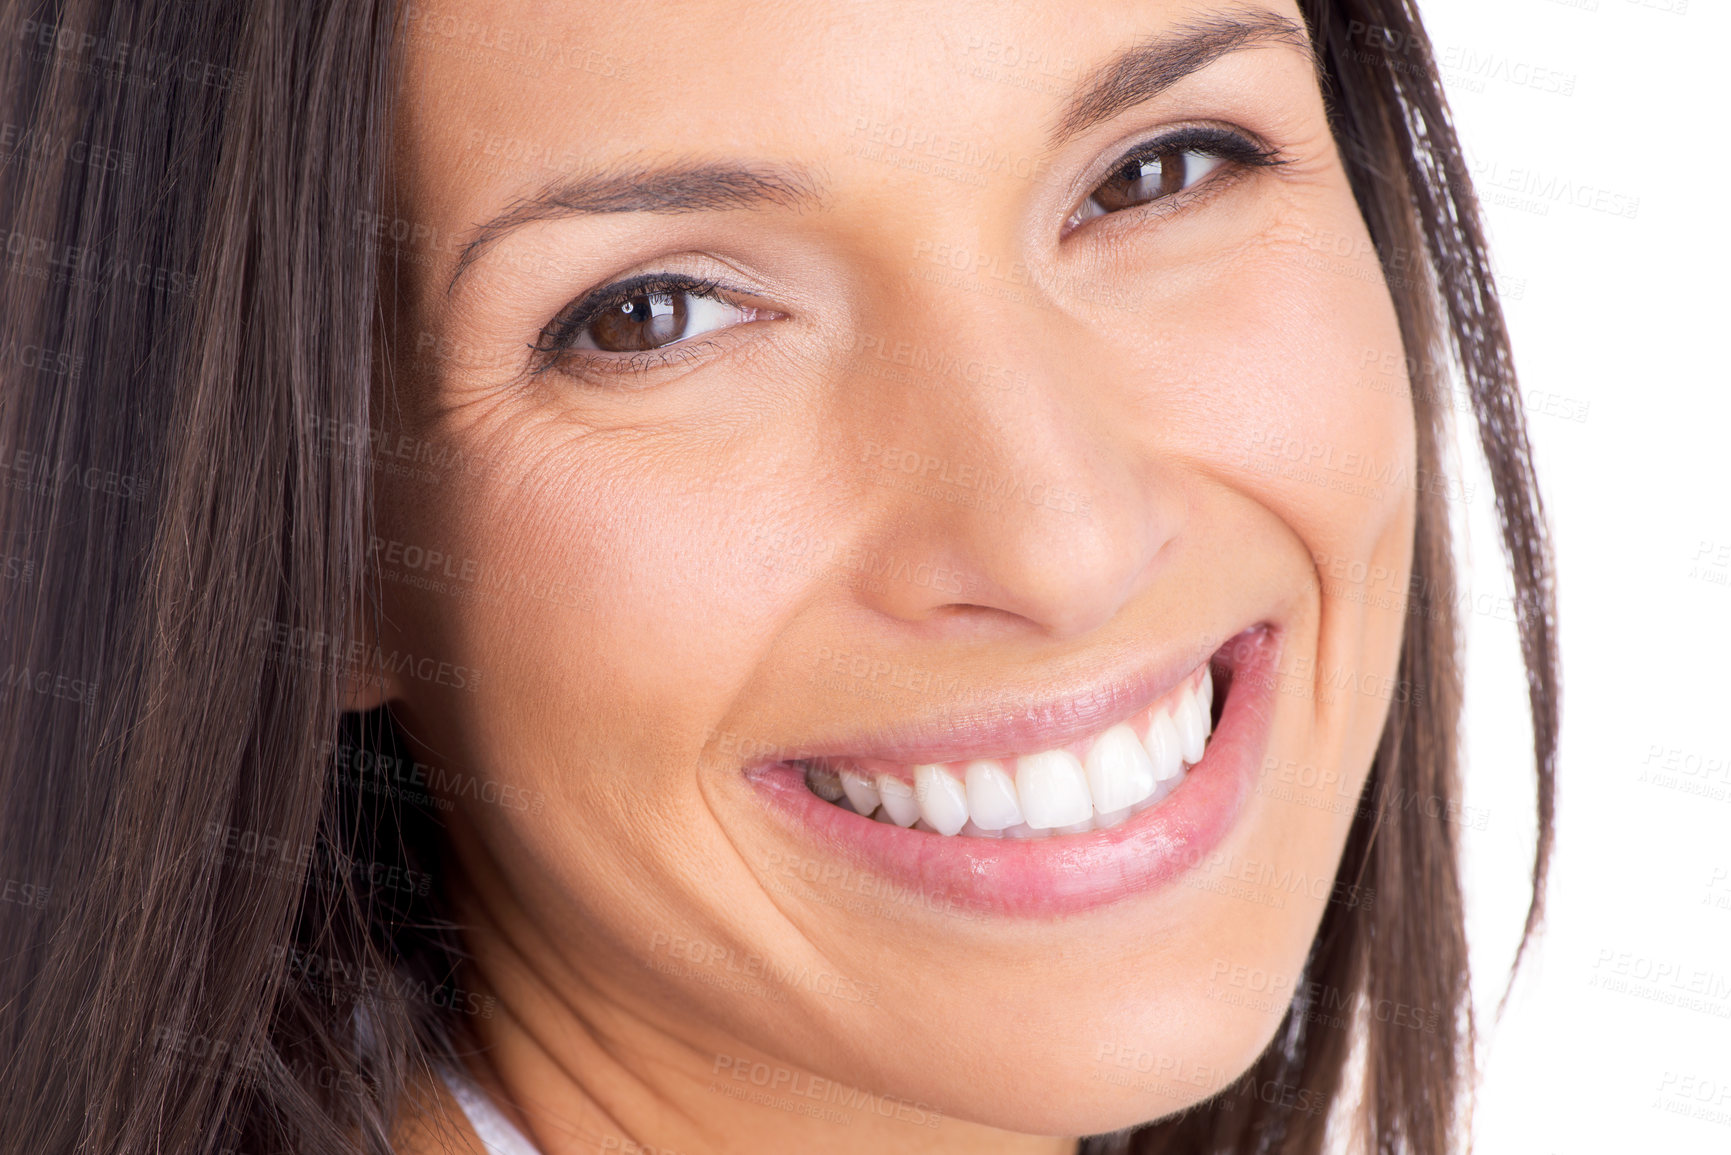 Buy stock photo Closeup studio portrait of a beautiful woman with a radiant smile